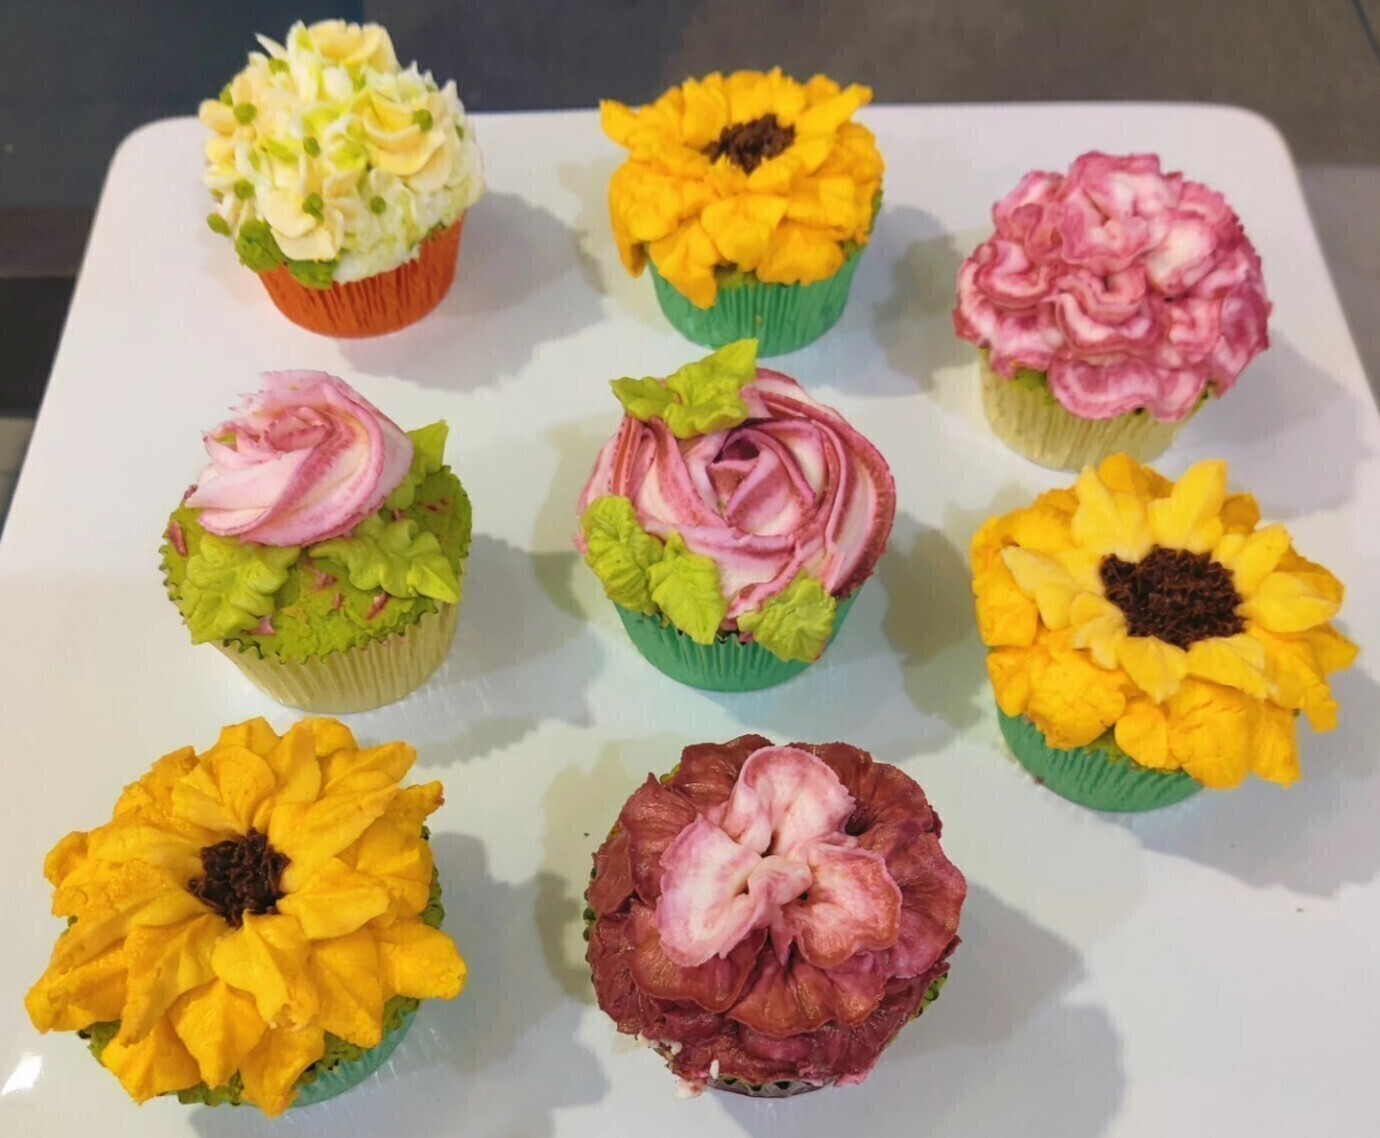 Flower themed cupcakes.